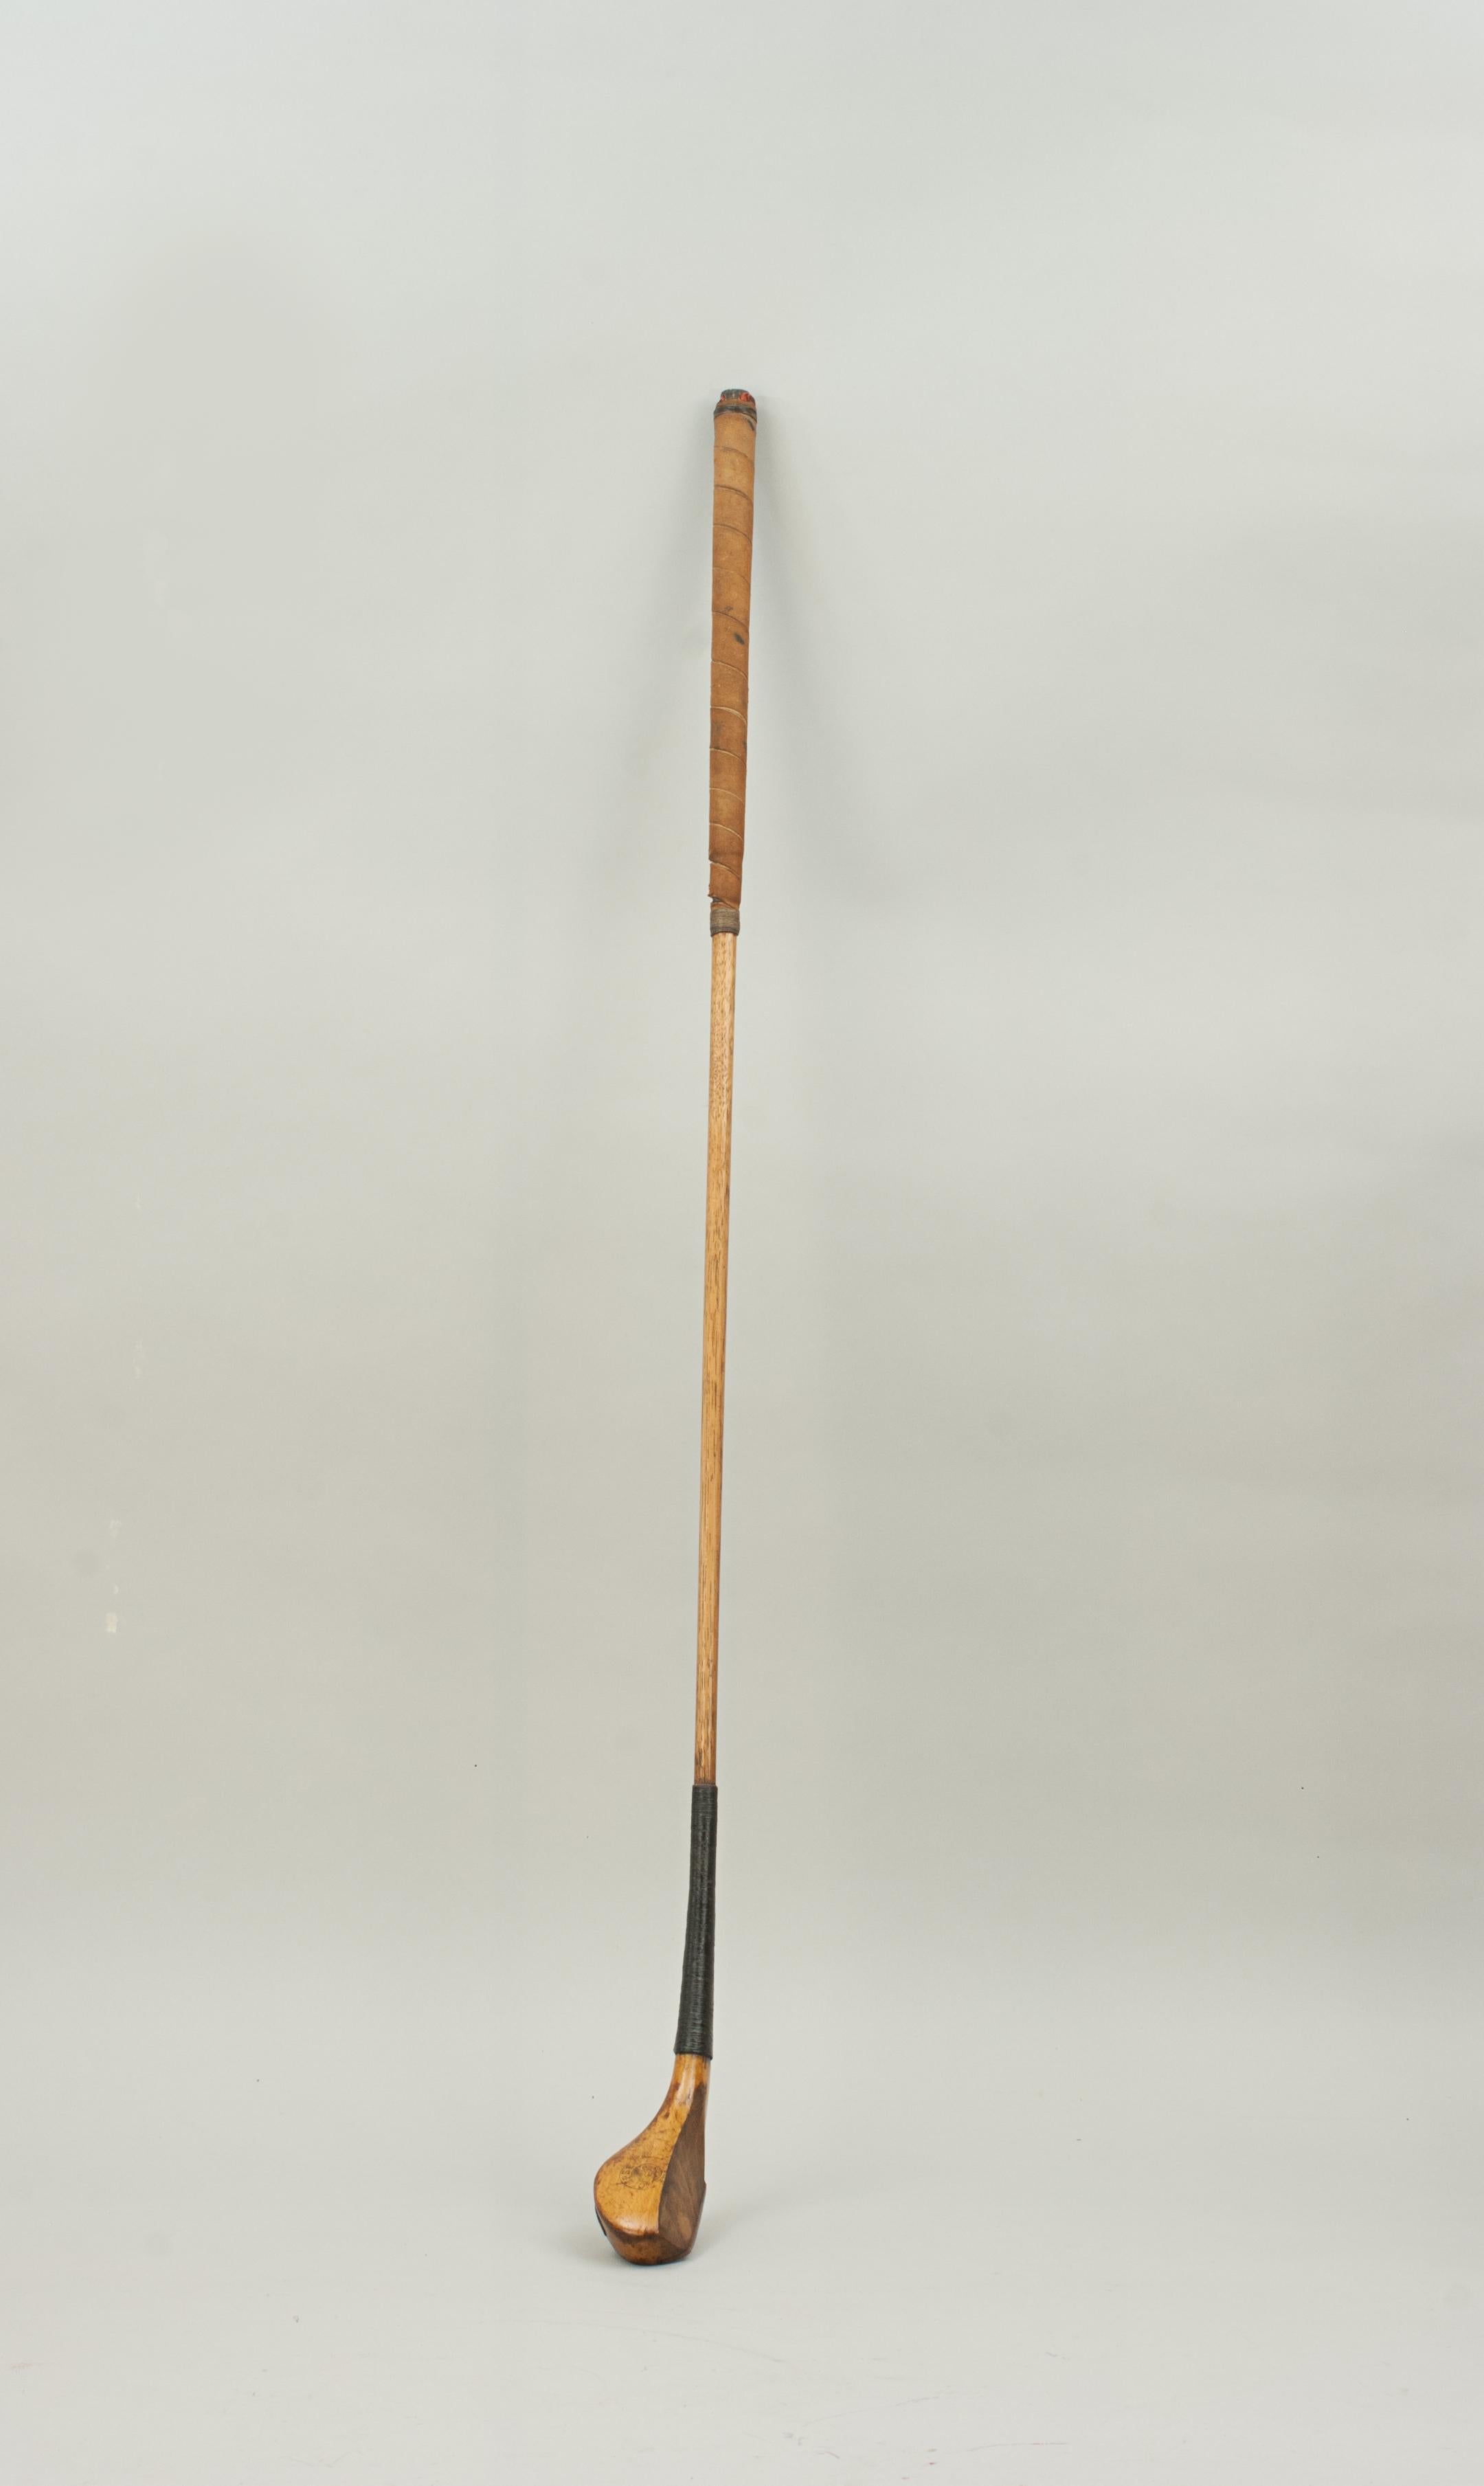 Vintage Golf Club, Transitional Long Nose Lofter, the Eclipse For Sale 3